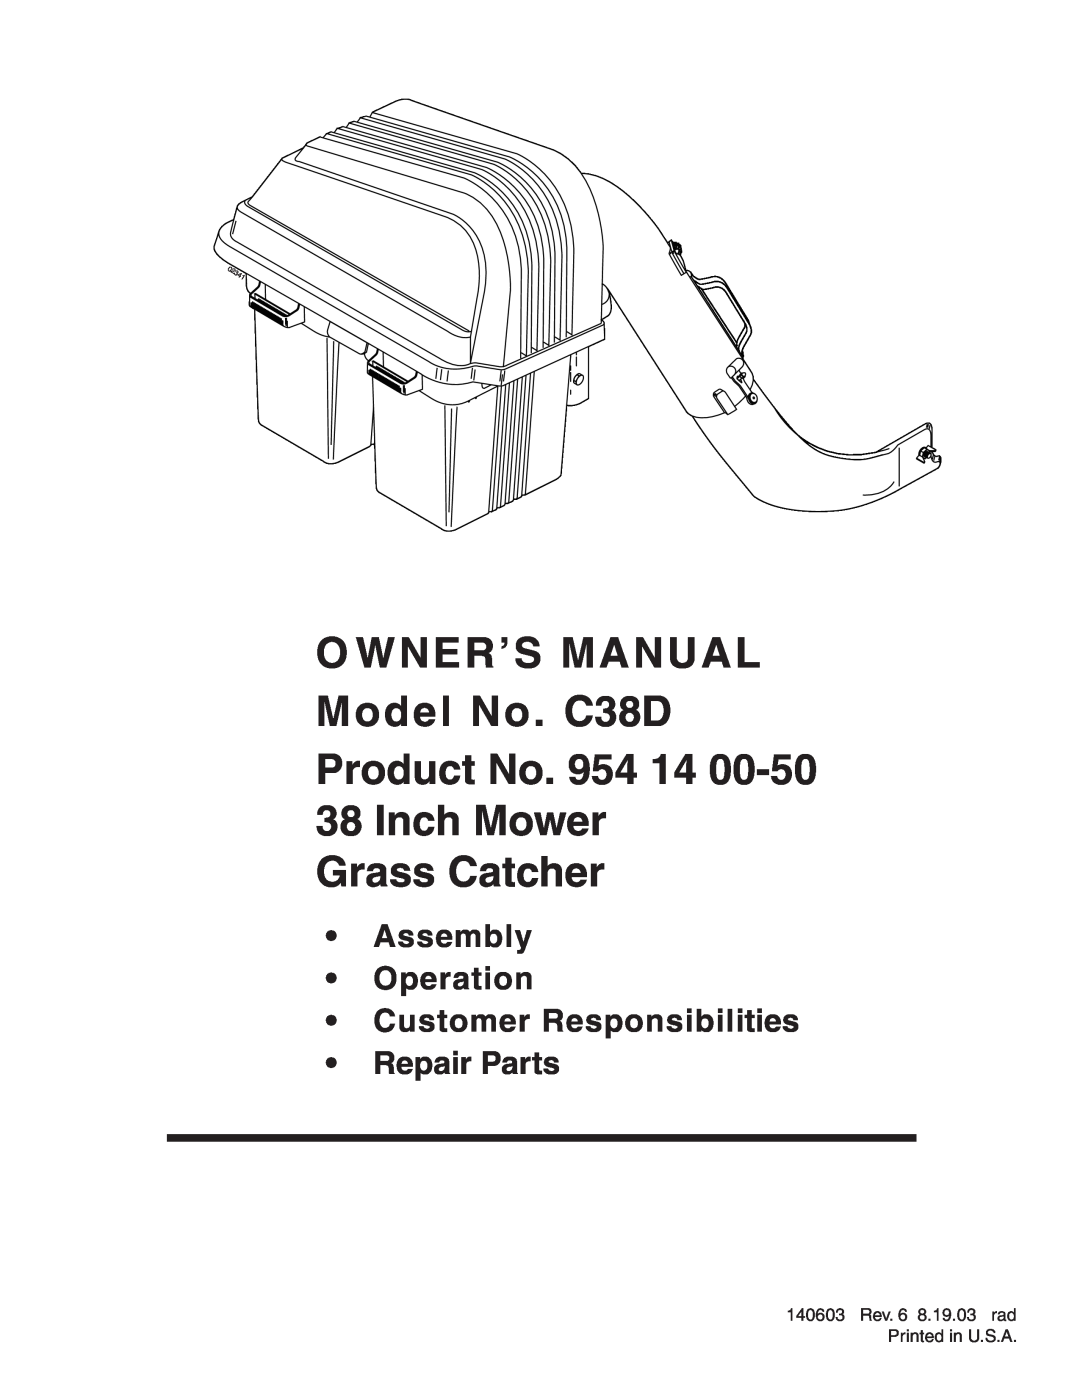 Poulan 954 14 00-50 owner manual O WNER’S MANUAL Model No. C38D Product No. 954 14 38 Inch Mower, Grass Catcher, tain 